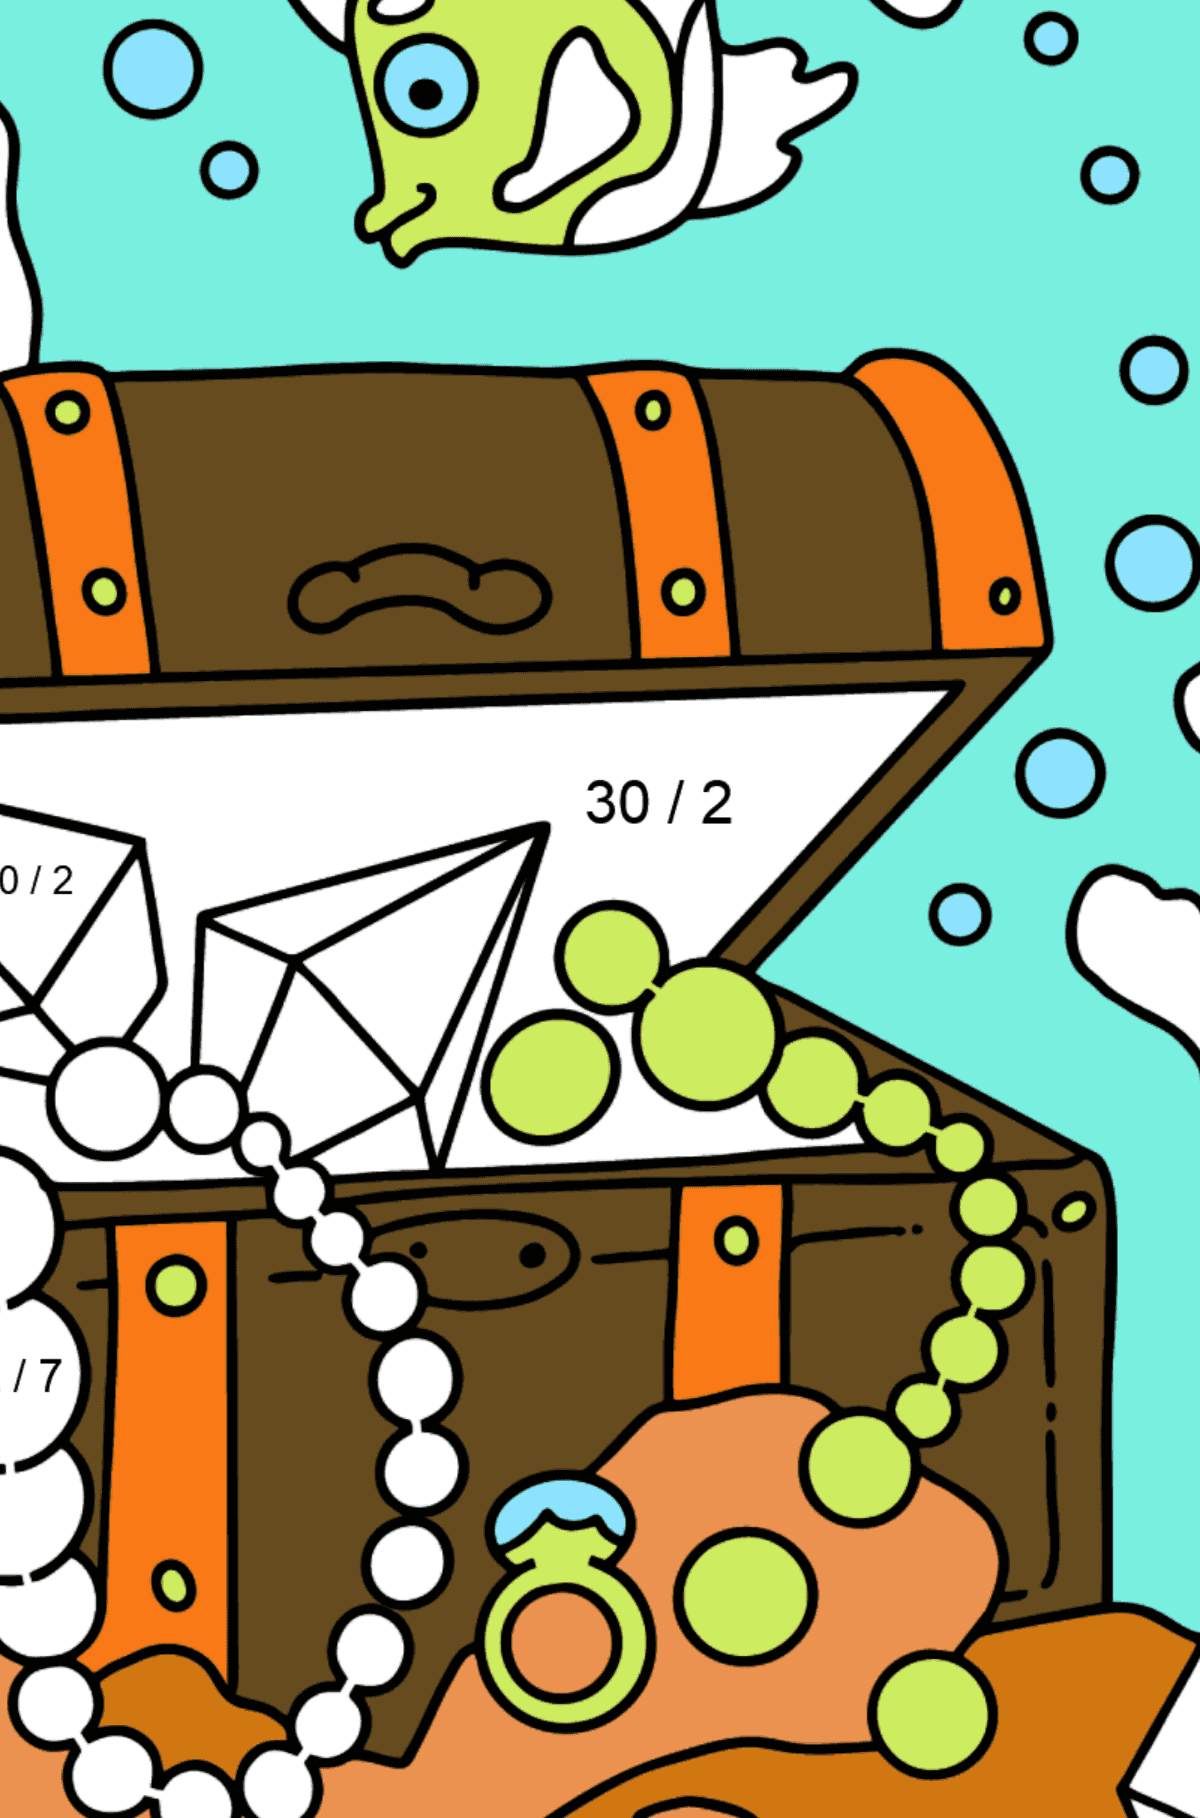 Coloring Page - A Fish is Swimming Around a Pirate's Chest - Math Coloring - Division for Kids